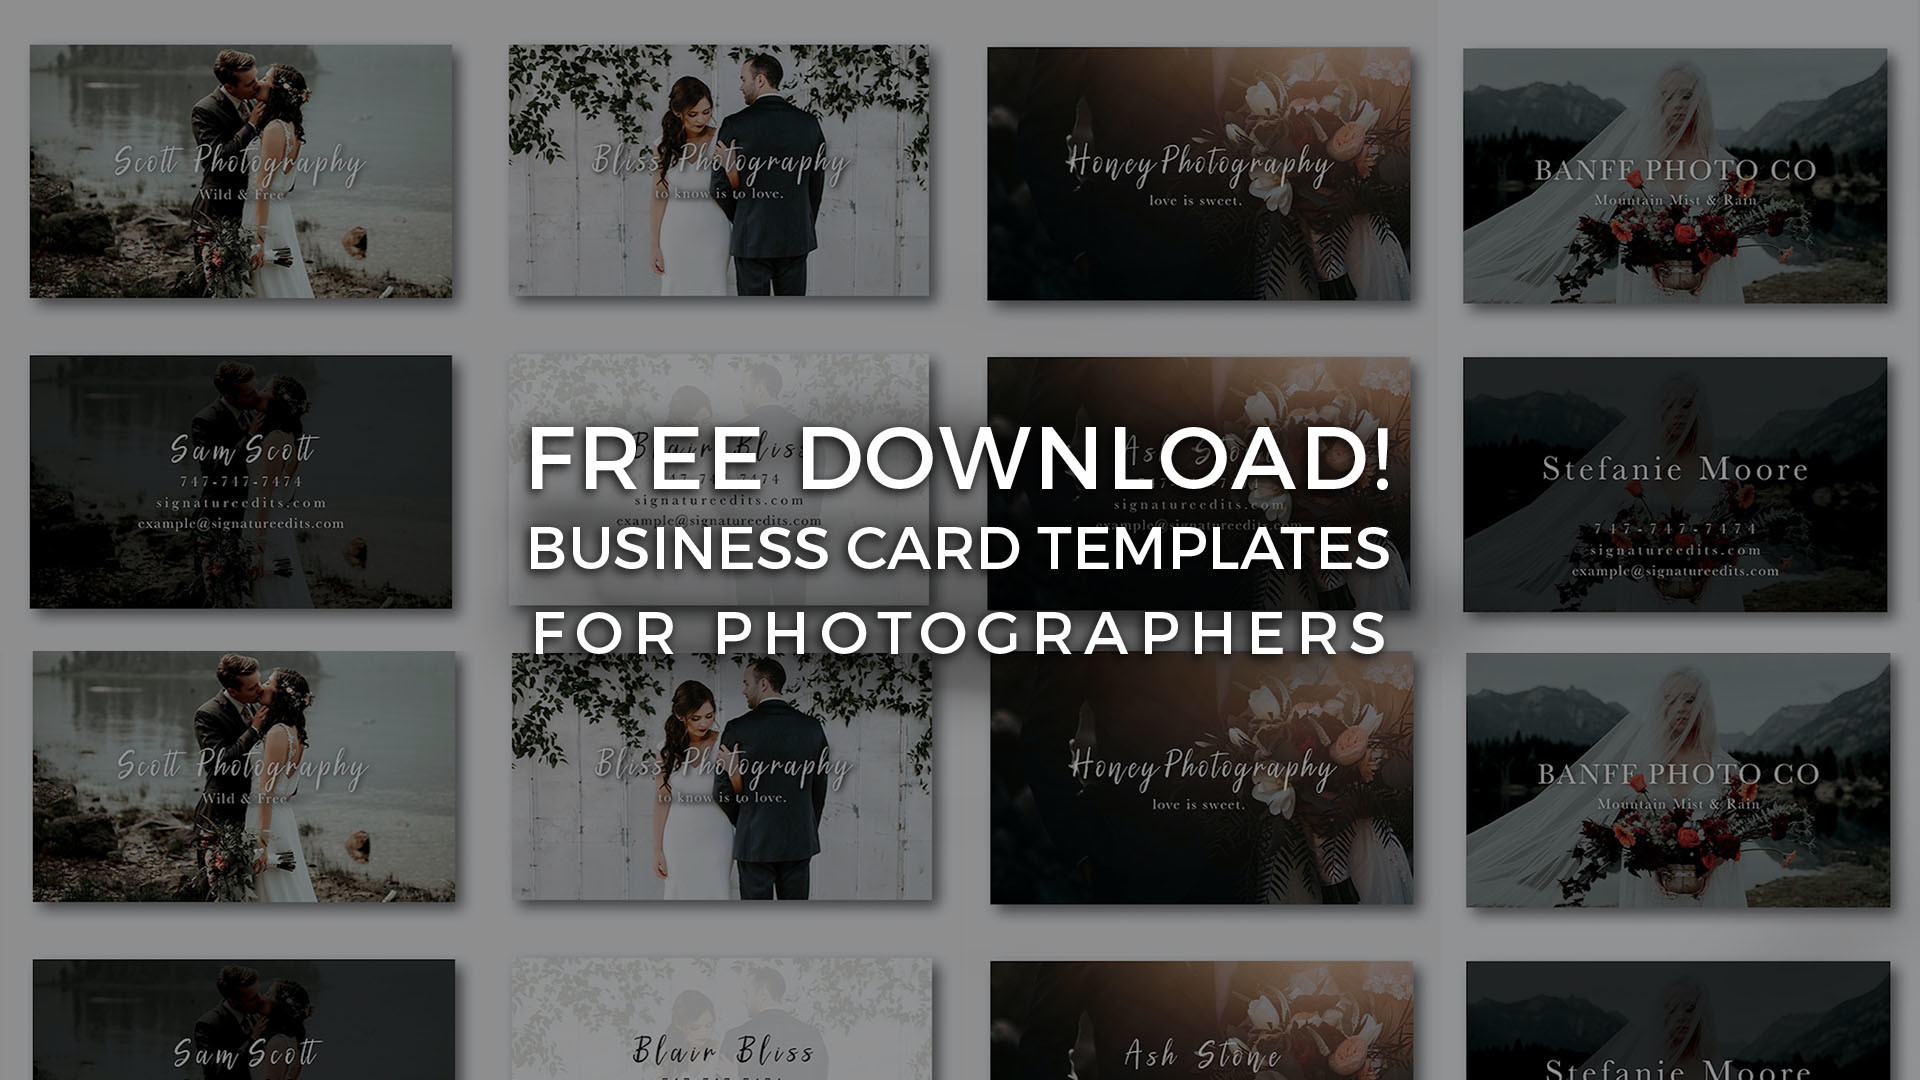 Free Photographer Business Card Templates! - Signature Edits With Regard To Free Business Card Templates For Photographers